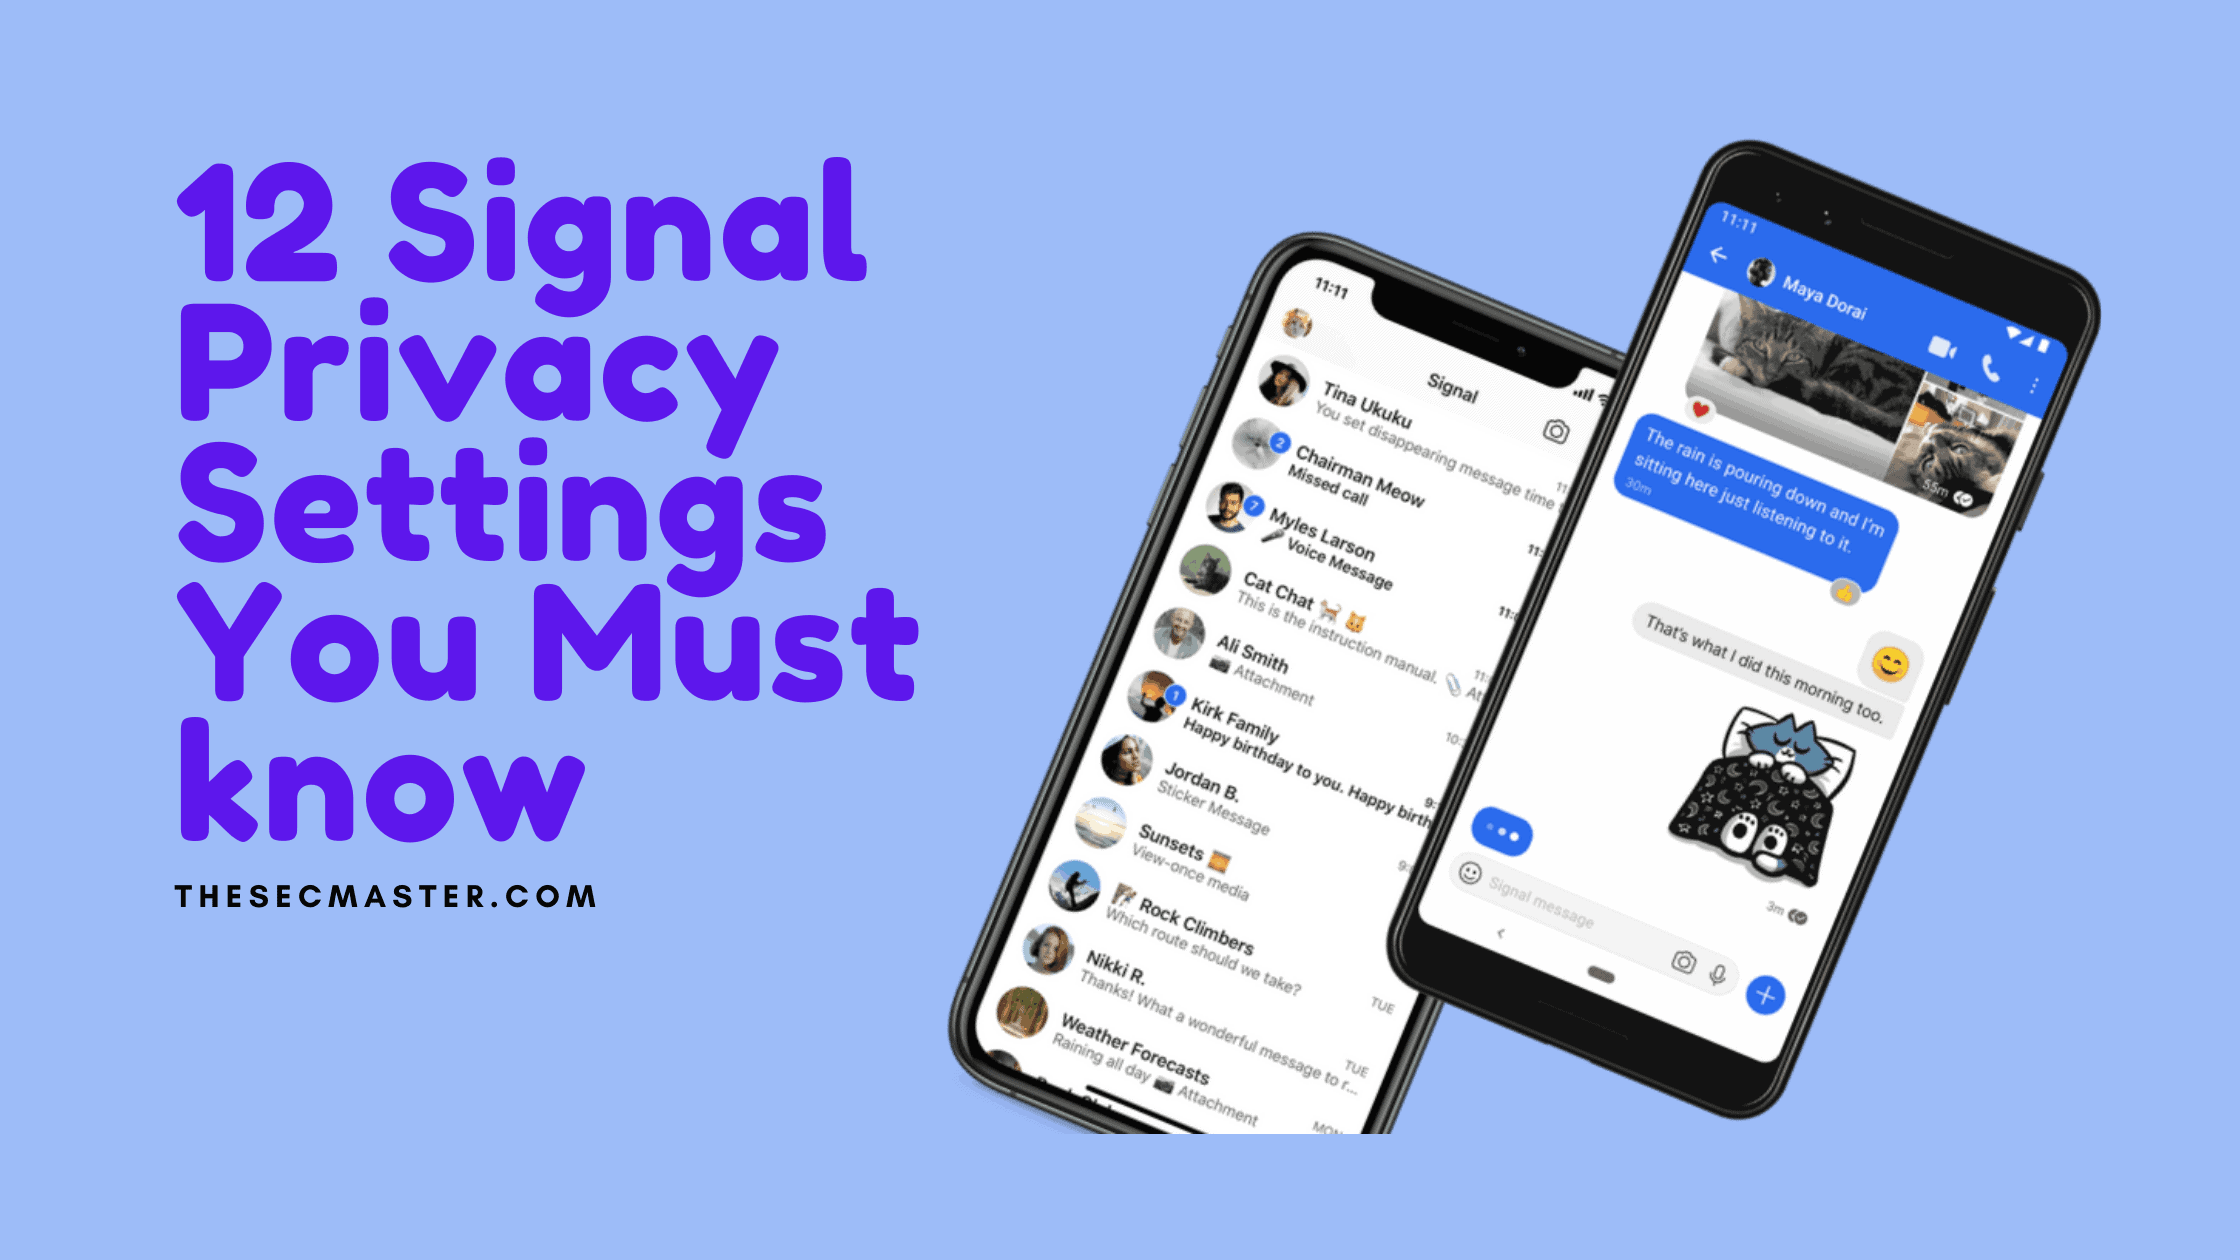 12 Signal Privacy Settings You Must Know